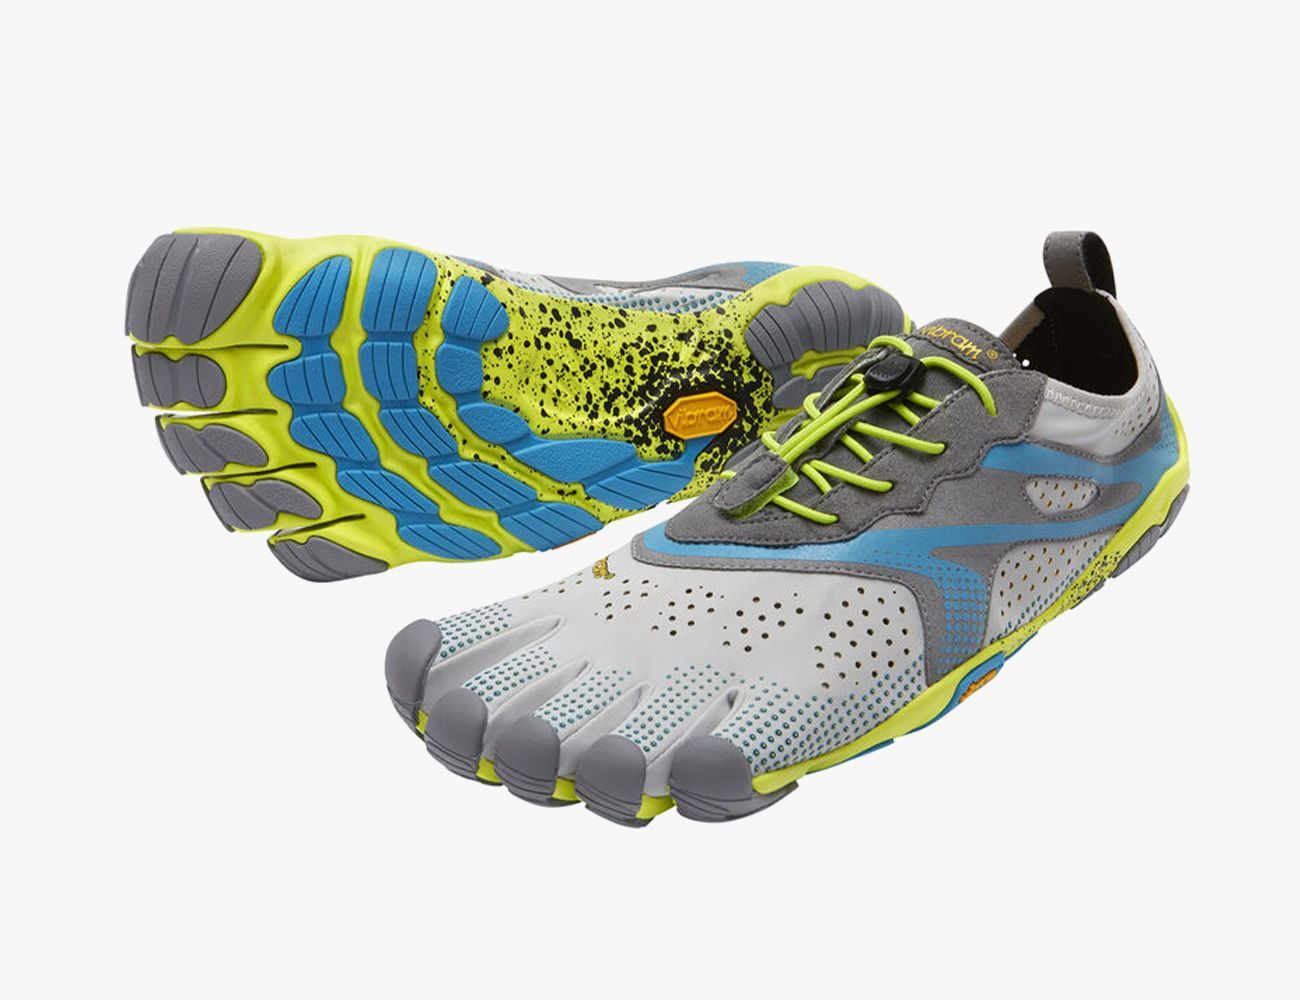 Leap Into With the Best Barefoot Running Shoes